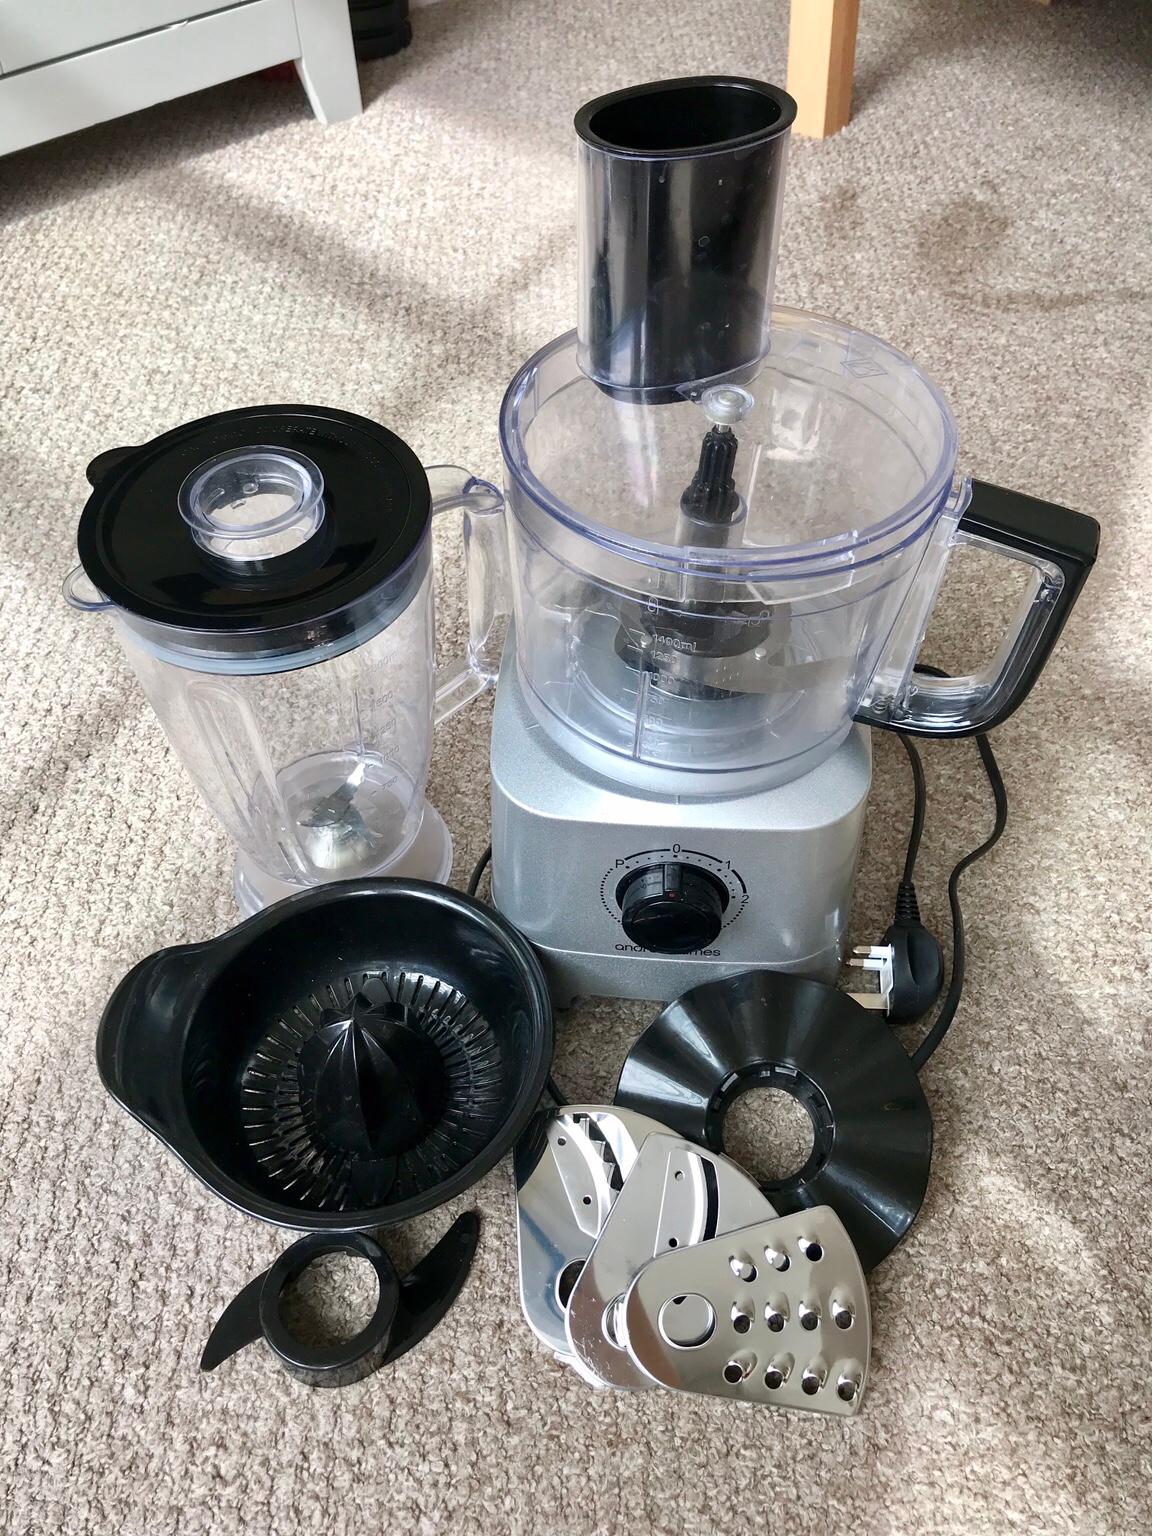 Andrew James Food Processor with Blender in SE23 London for £25.00 for ...